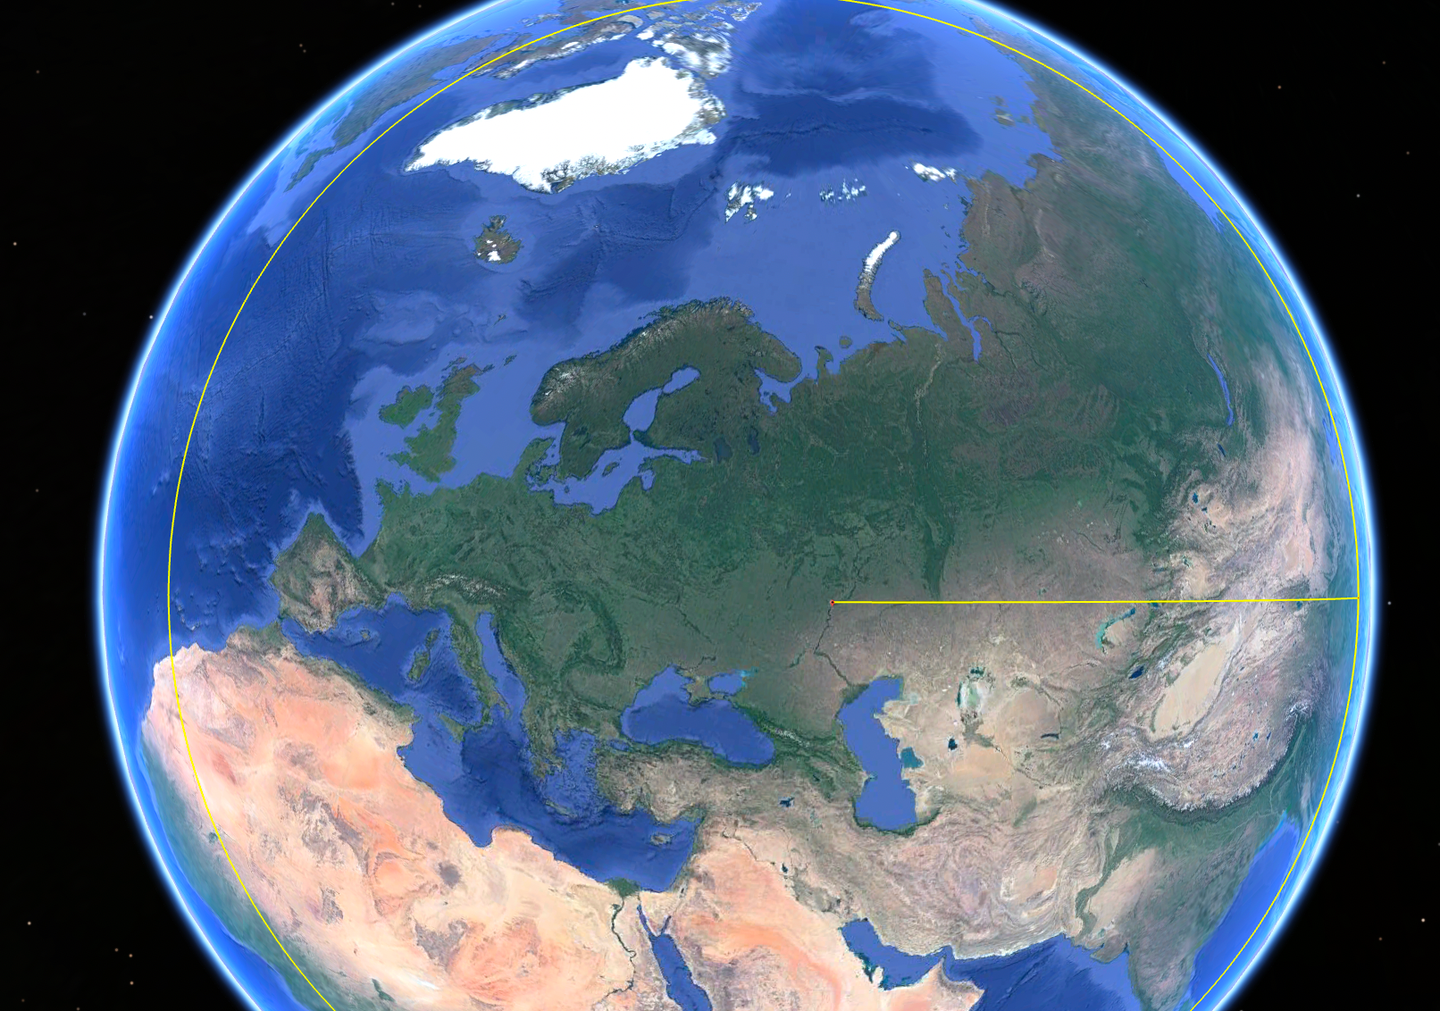 The considerably expanded reach of the Kh-BD, based on the claimed range of 3,700 miles. Engels is the launch point. <em>Google Earth</em>